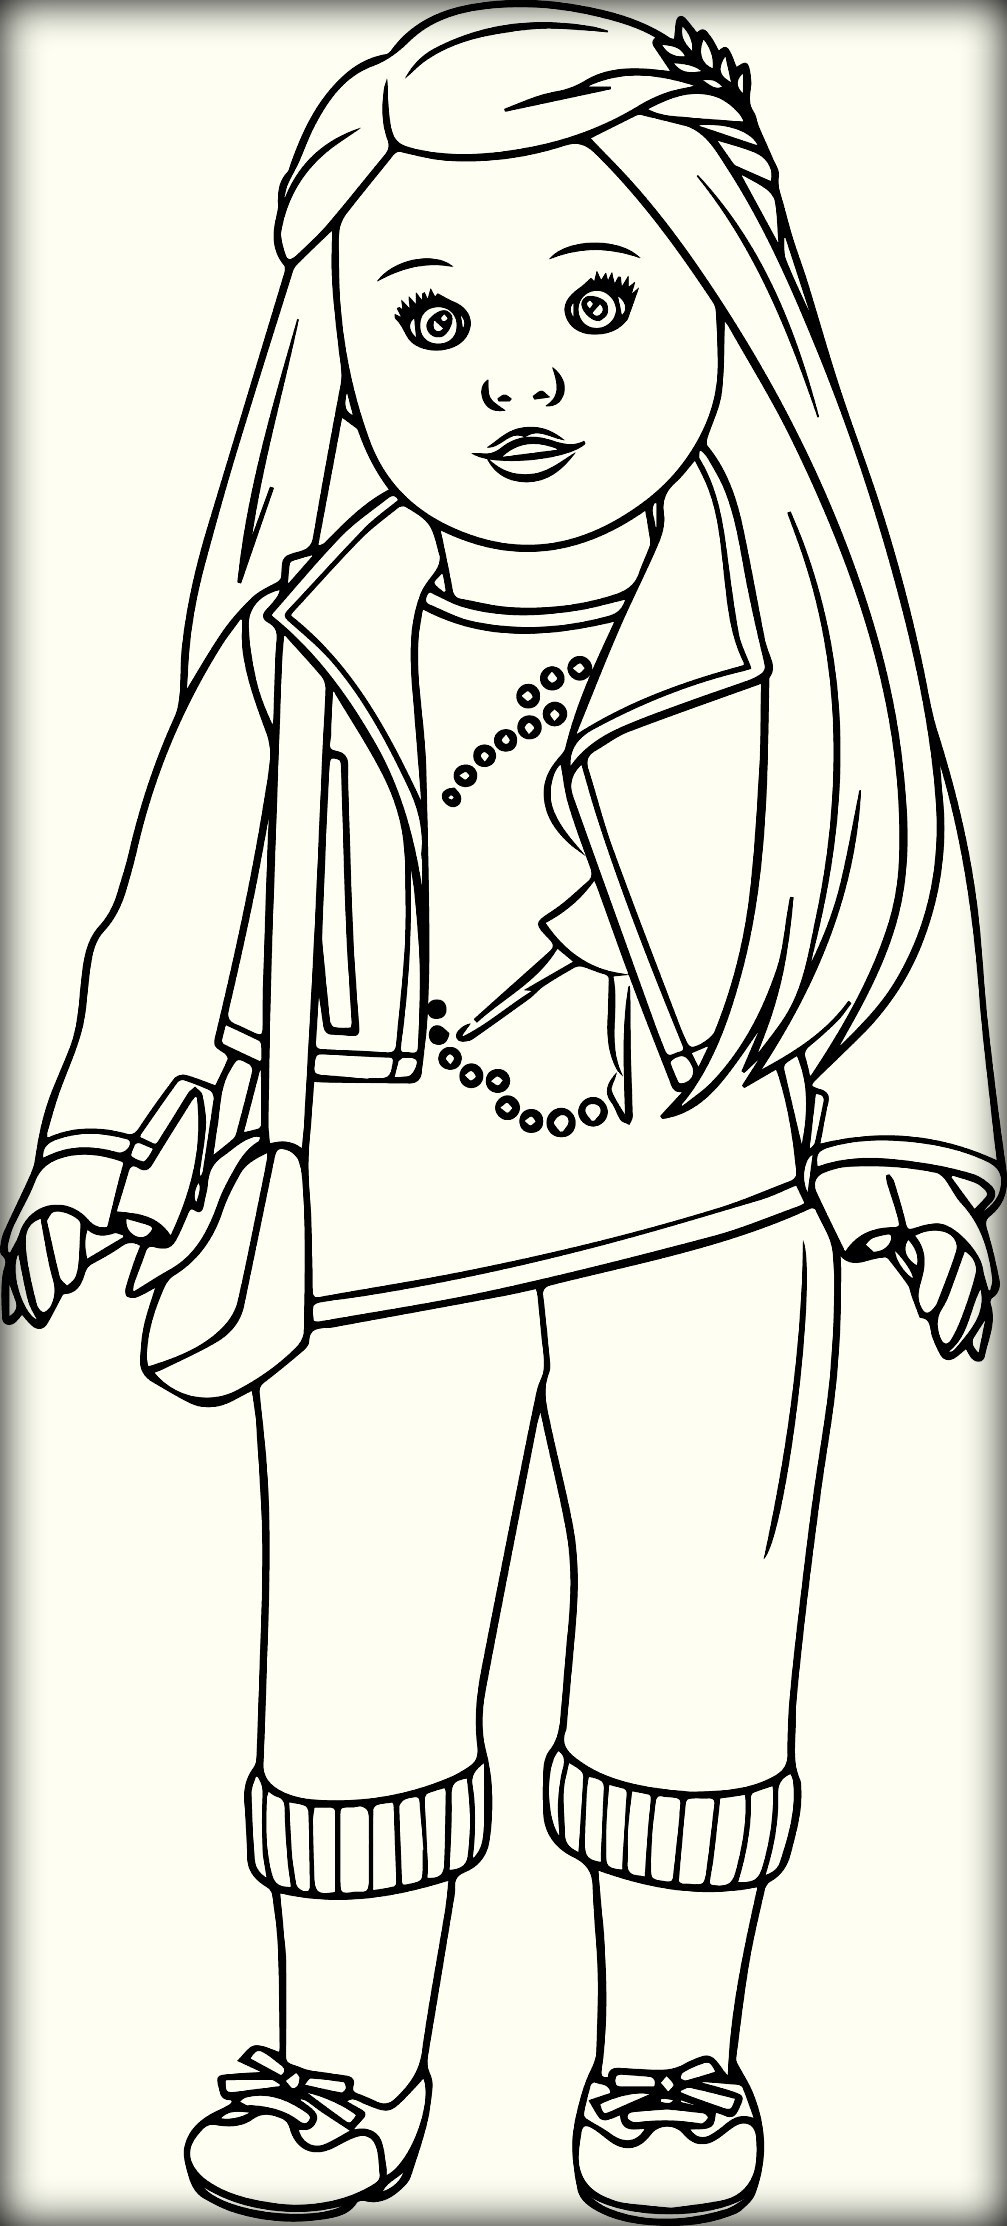 American Girl Coloring Pages To Print
 American Girl Free Colouring Pages